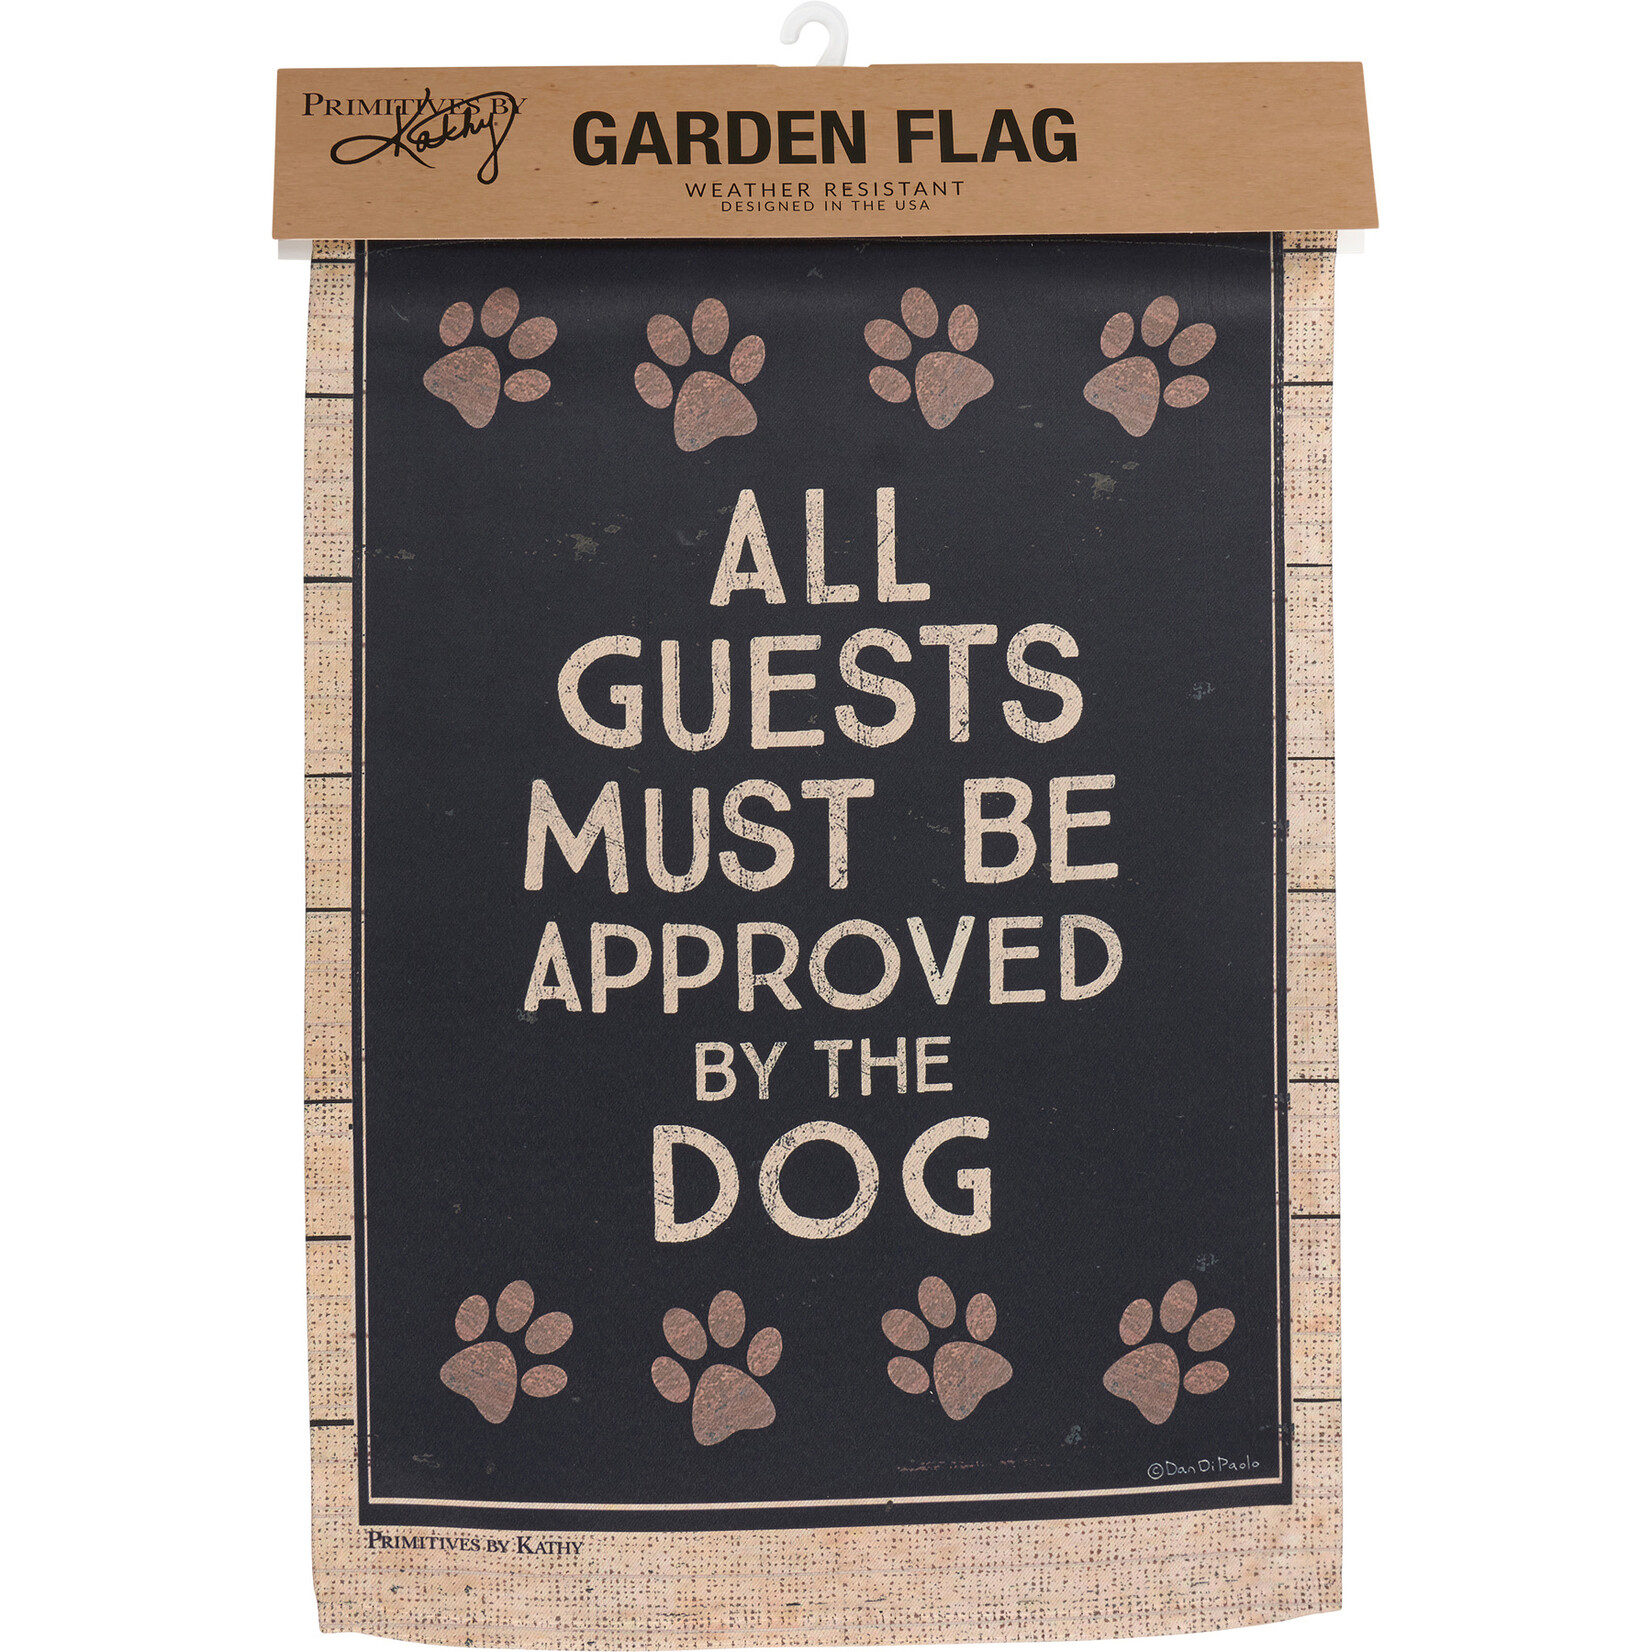 Primitives by Kathy Primitives by Kathy Approved By The Dog Garden Flag